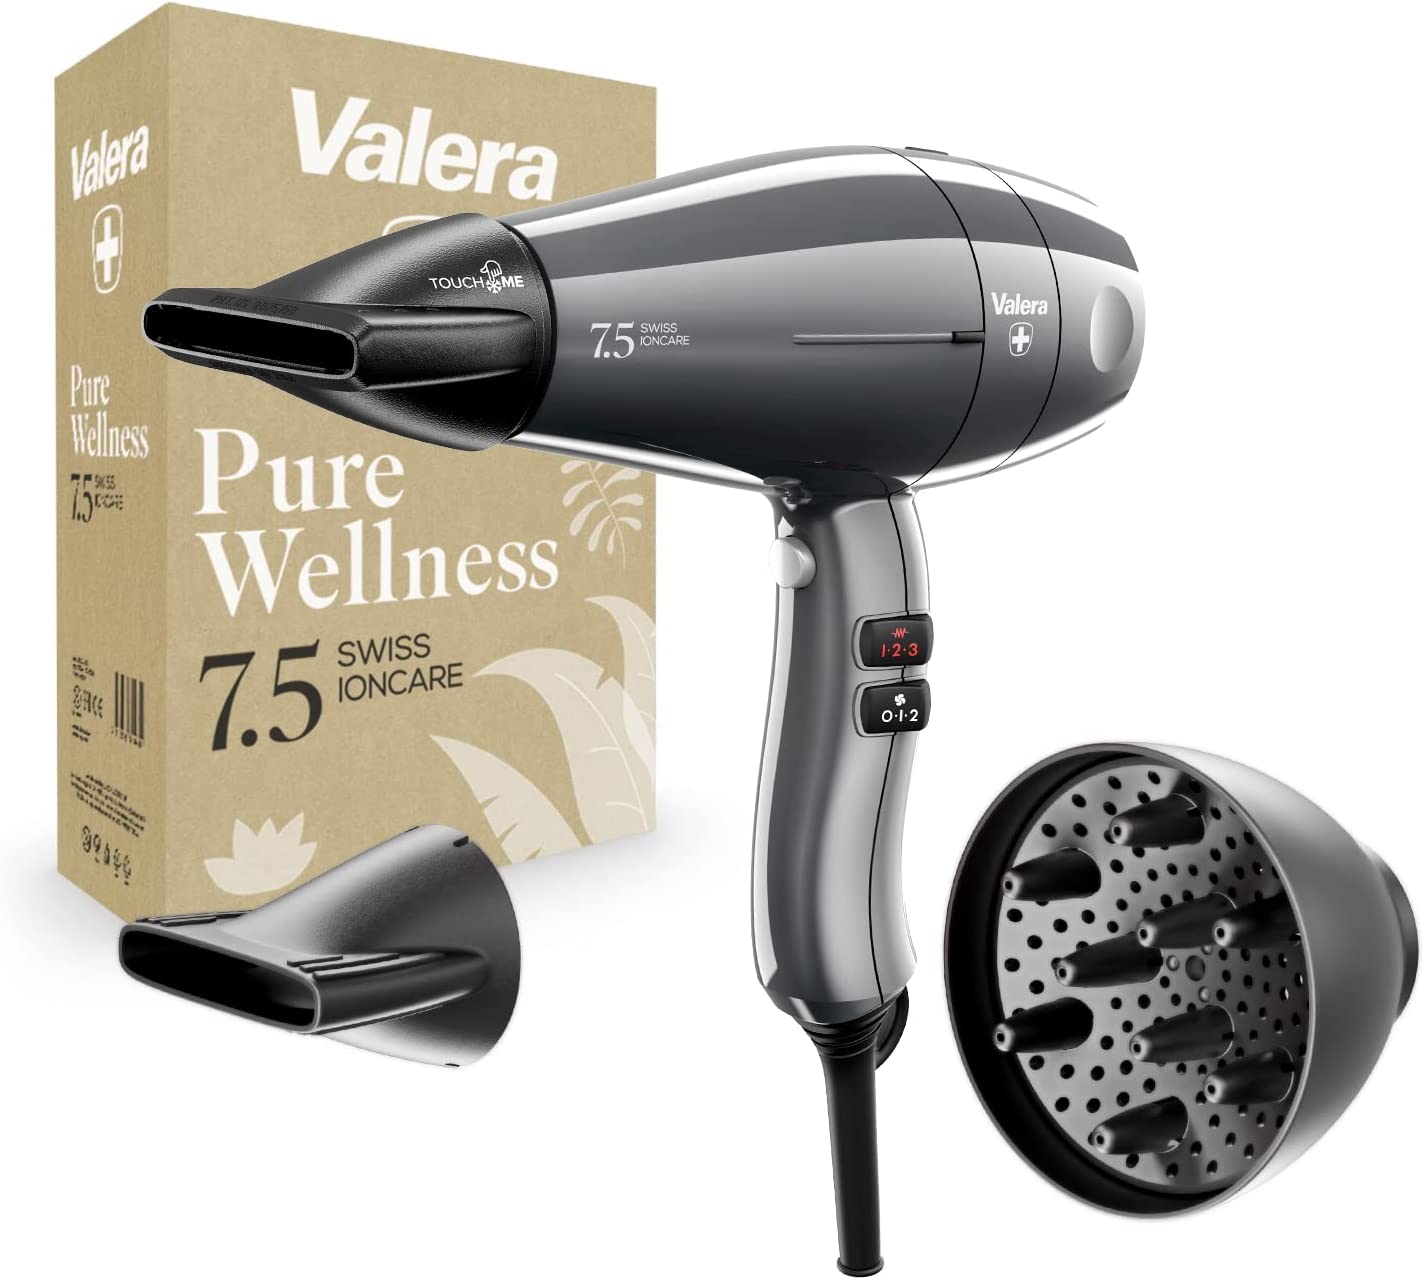 Valera Swiss Ioncare 7.5 Professional Ion Hair Dryer with Curl Diffuser, Super Light, for Quiet and Quick Drying, Sanify Air Purification, 2000 Watt, Timeless Grey